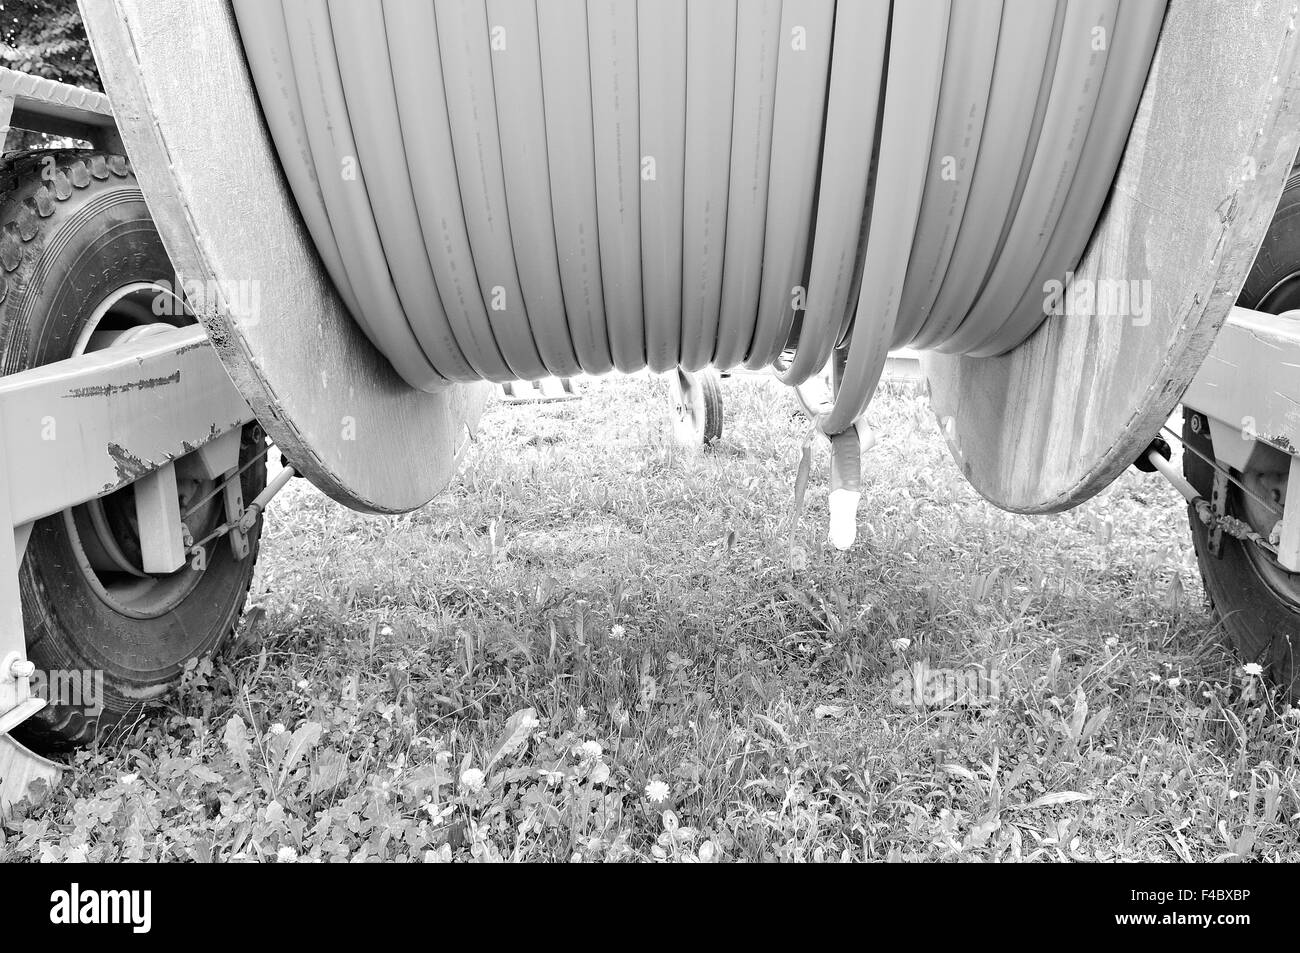 Cable drum trailer with broadband cable drum Stock Photo